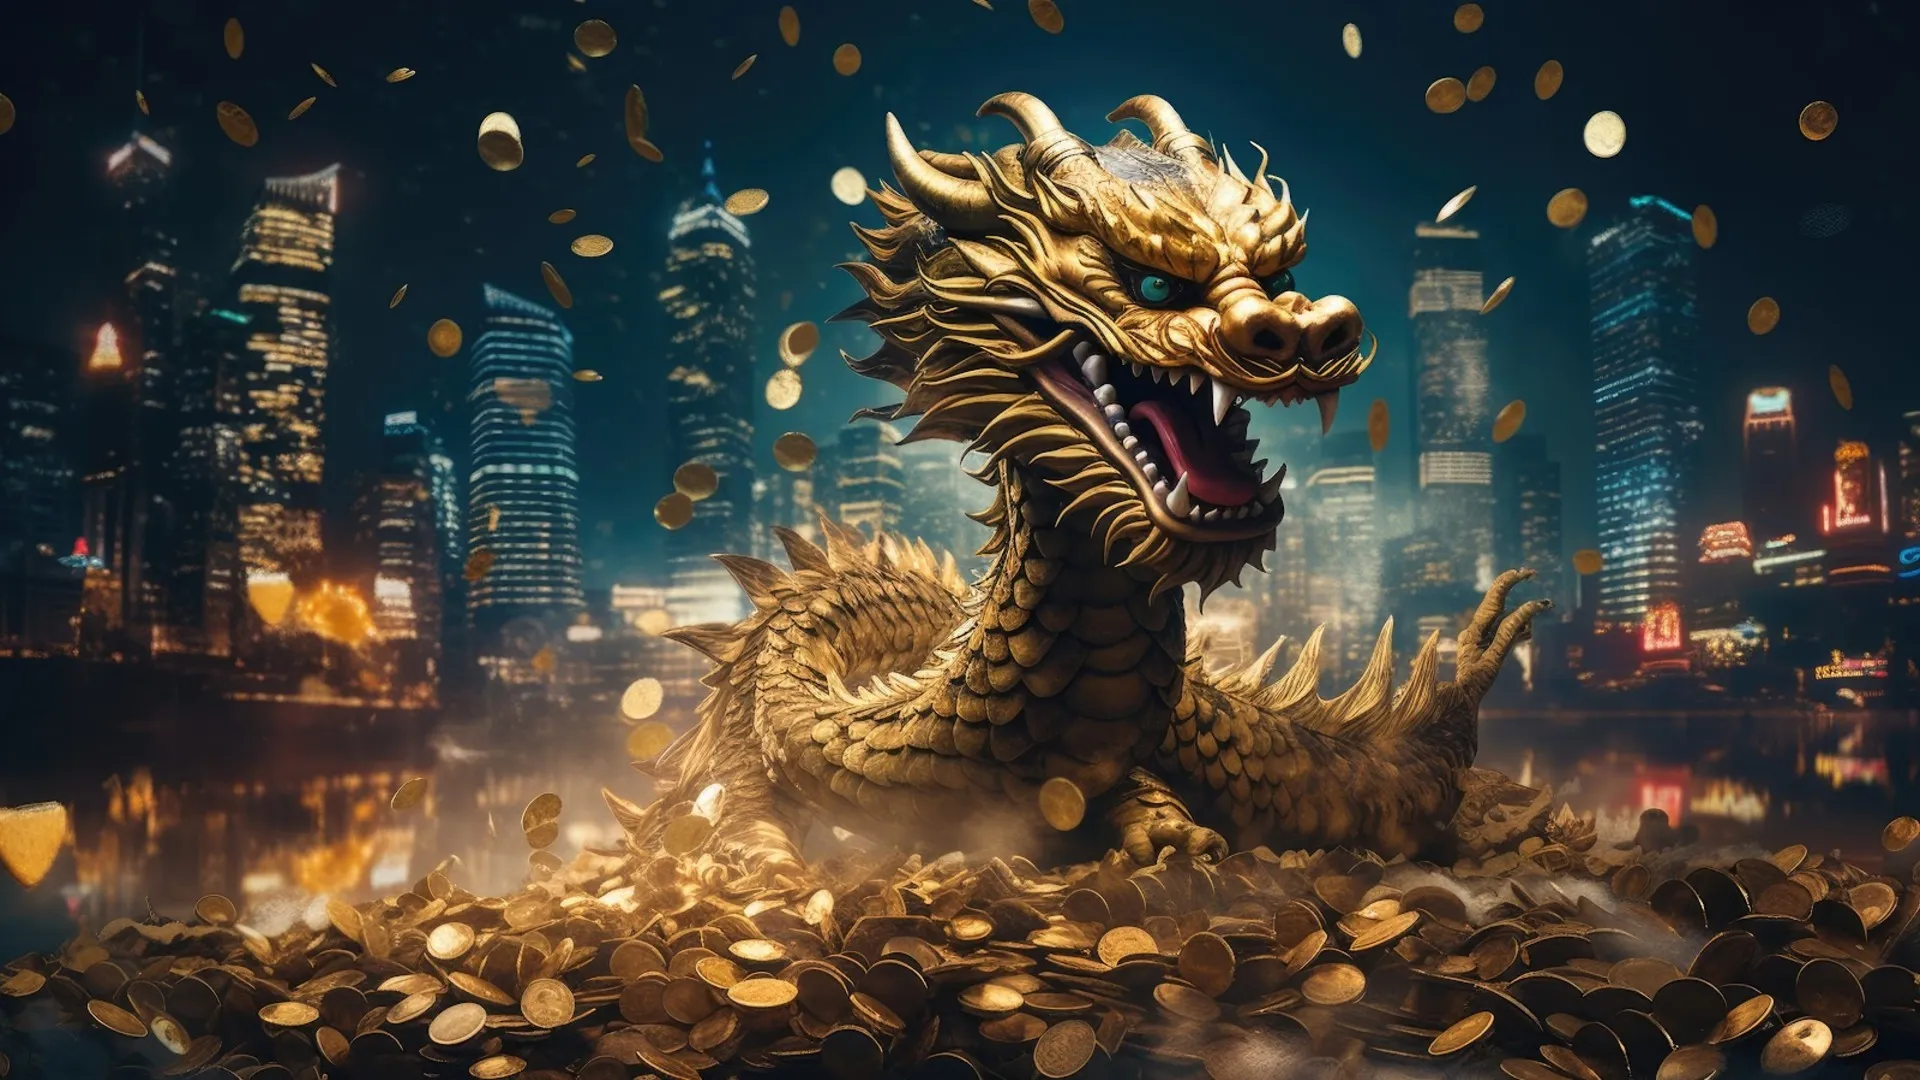 Well-Known Analyst Reveals the 5 Top Crypto Coins for the Year of the Dragon